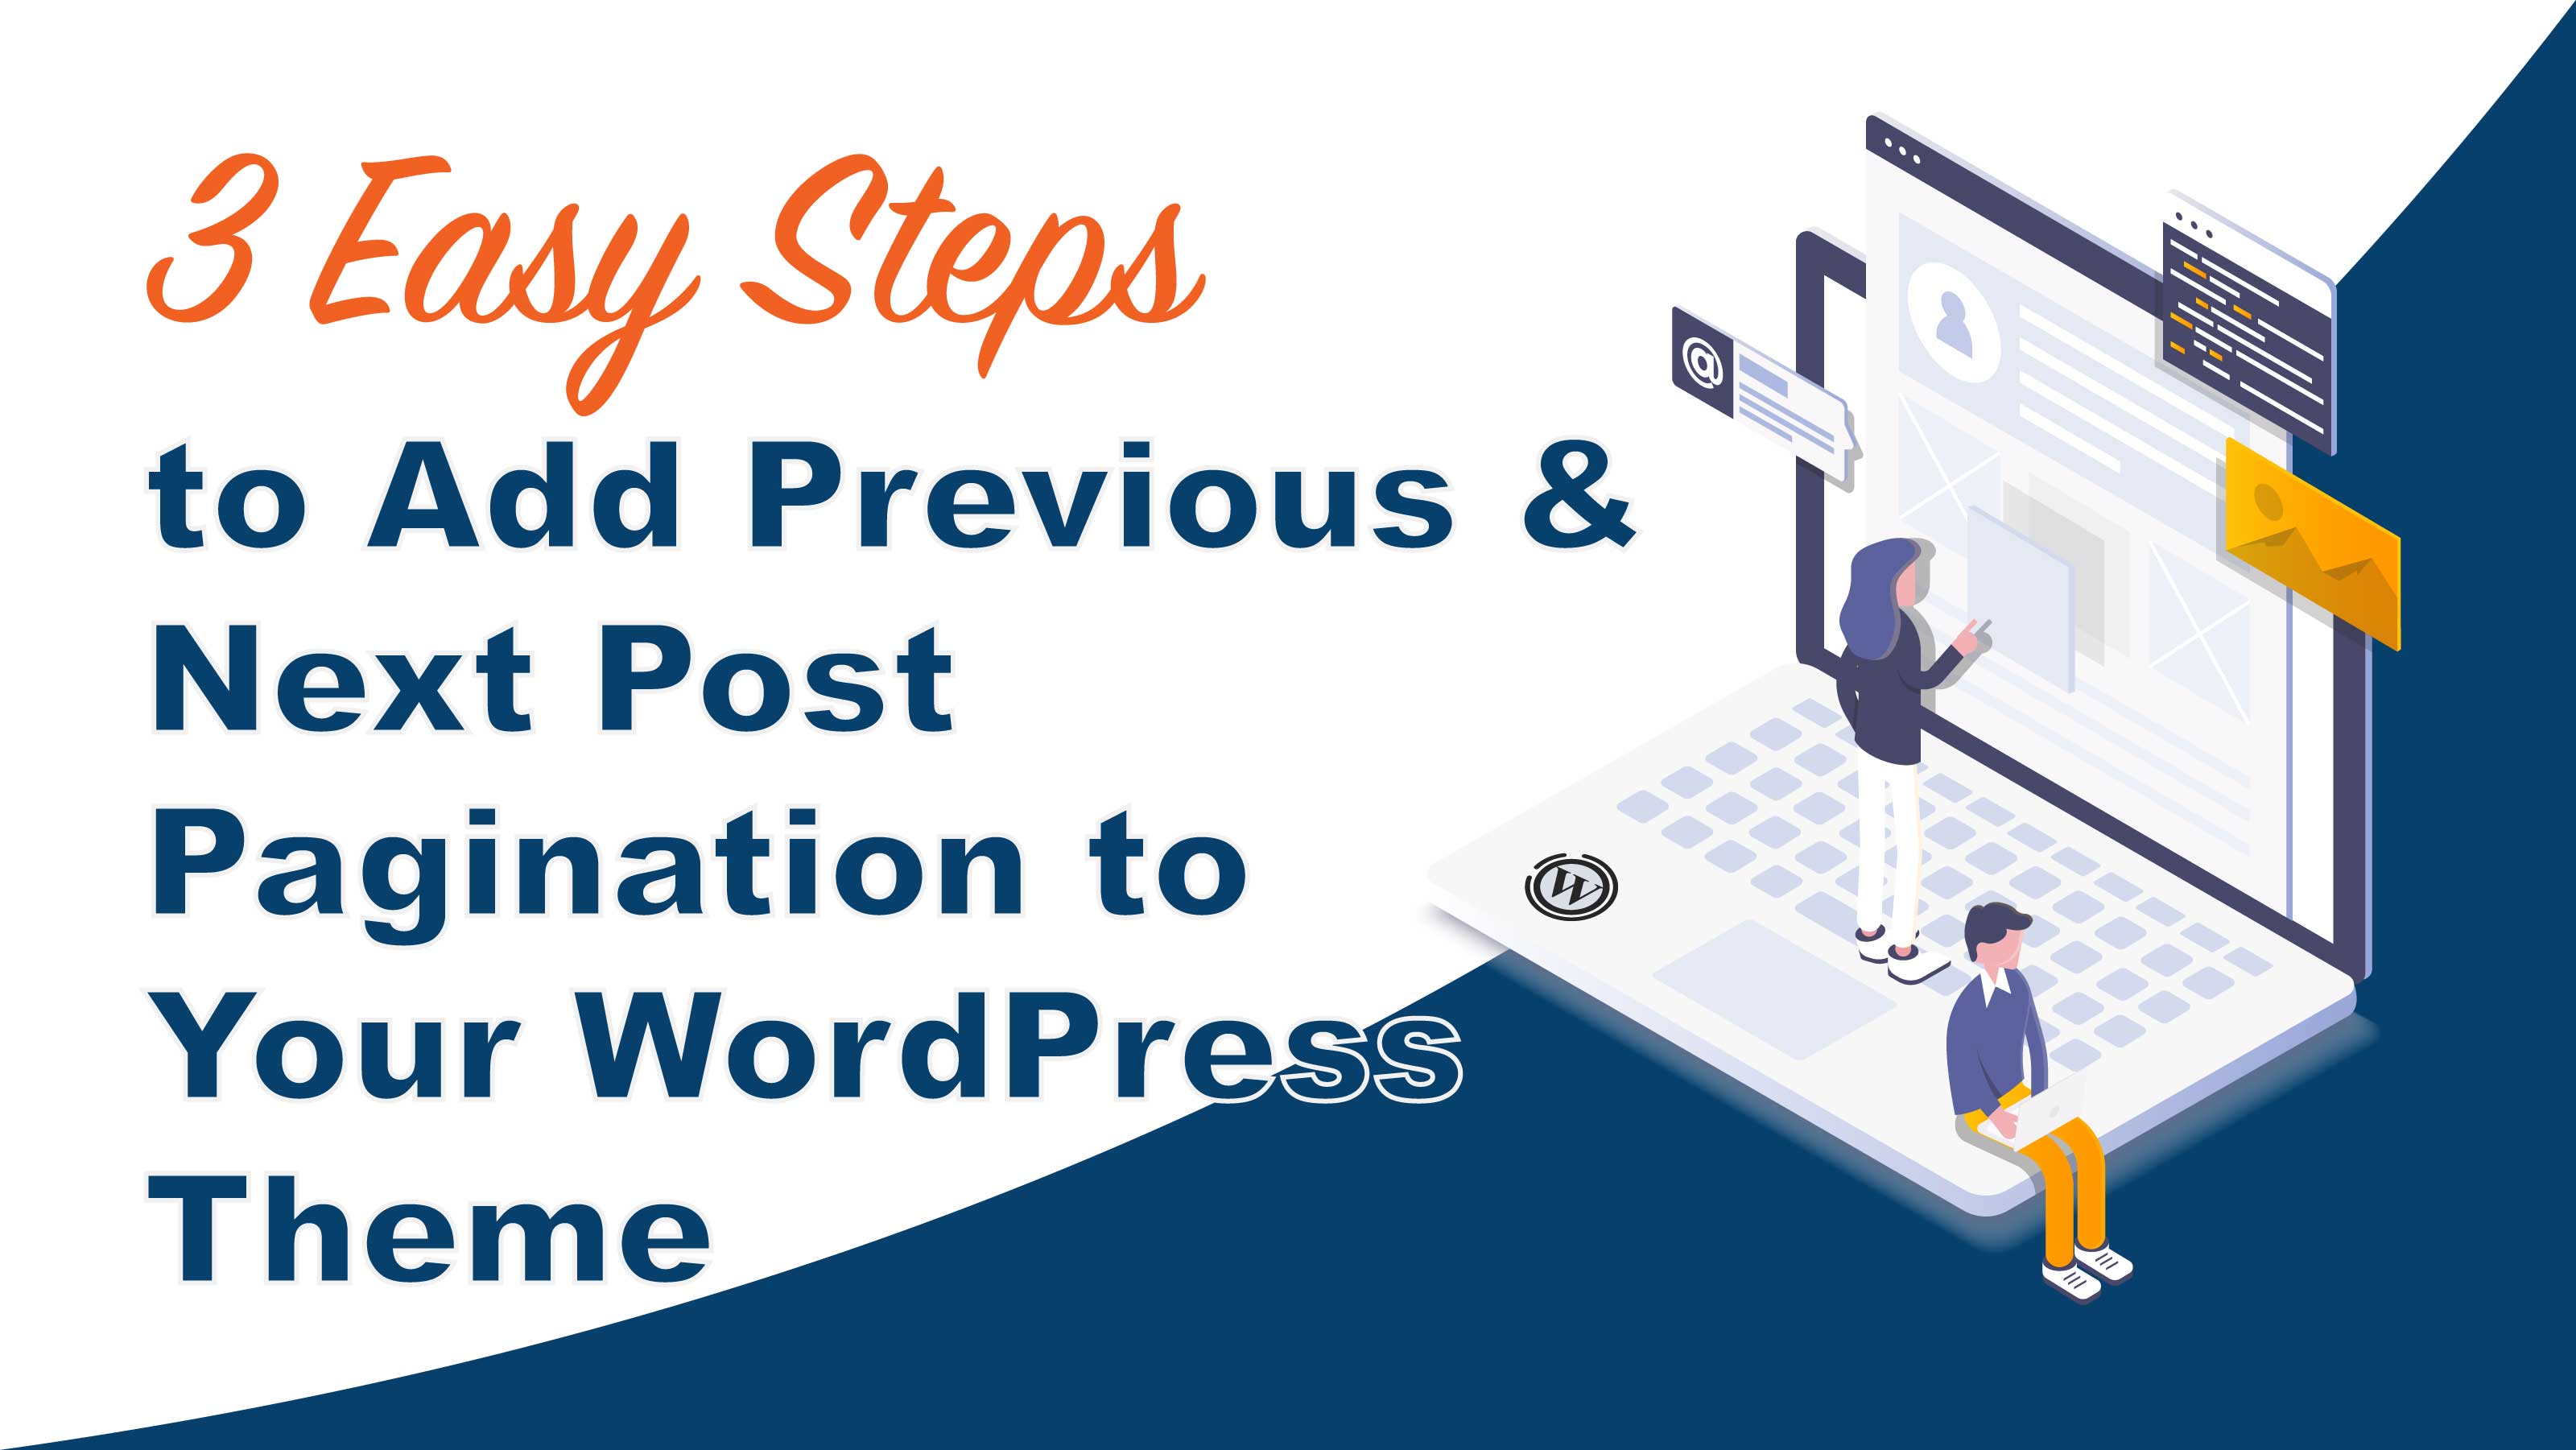 3 Easy Steps to Add Previous & Next Post Pagination to Your WordPress Theme